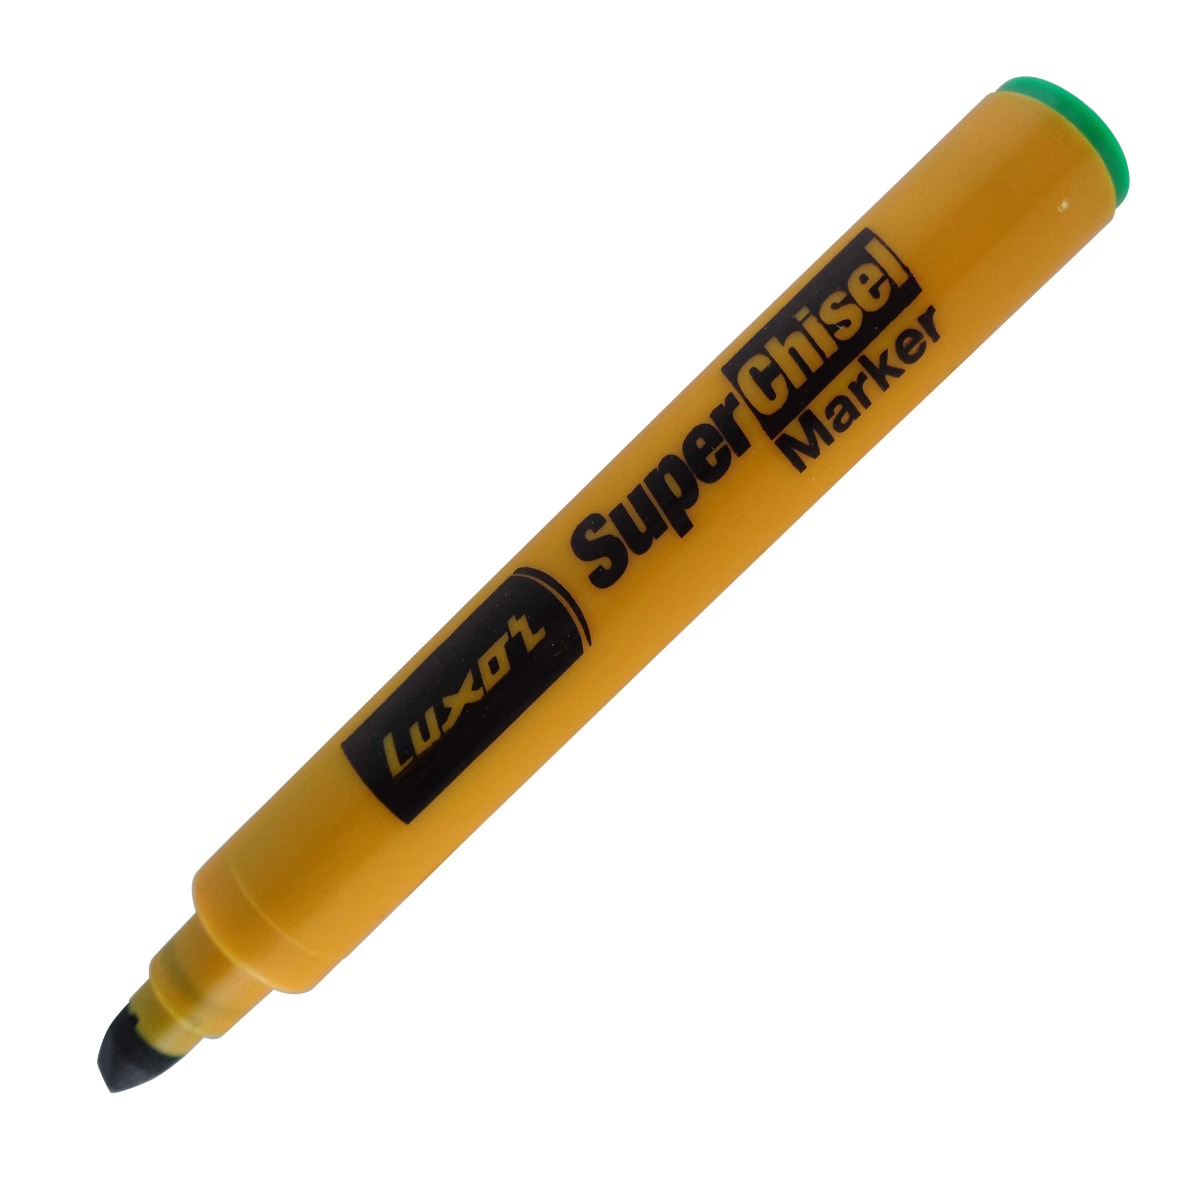 Luxor Model: 15096 Super chisel Yellow color body with Green color cap with green ink marker